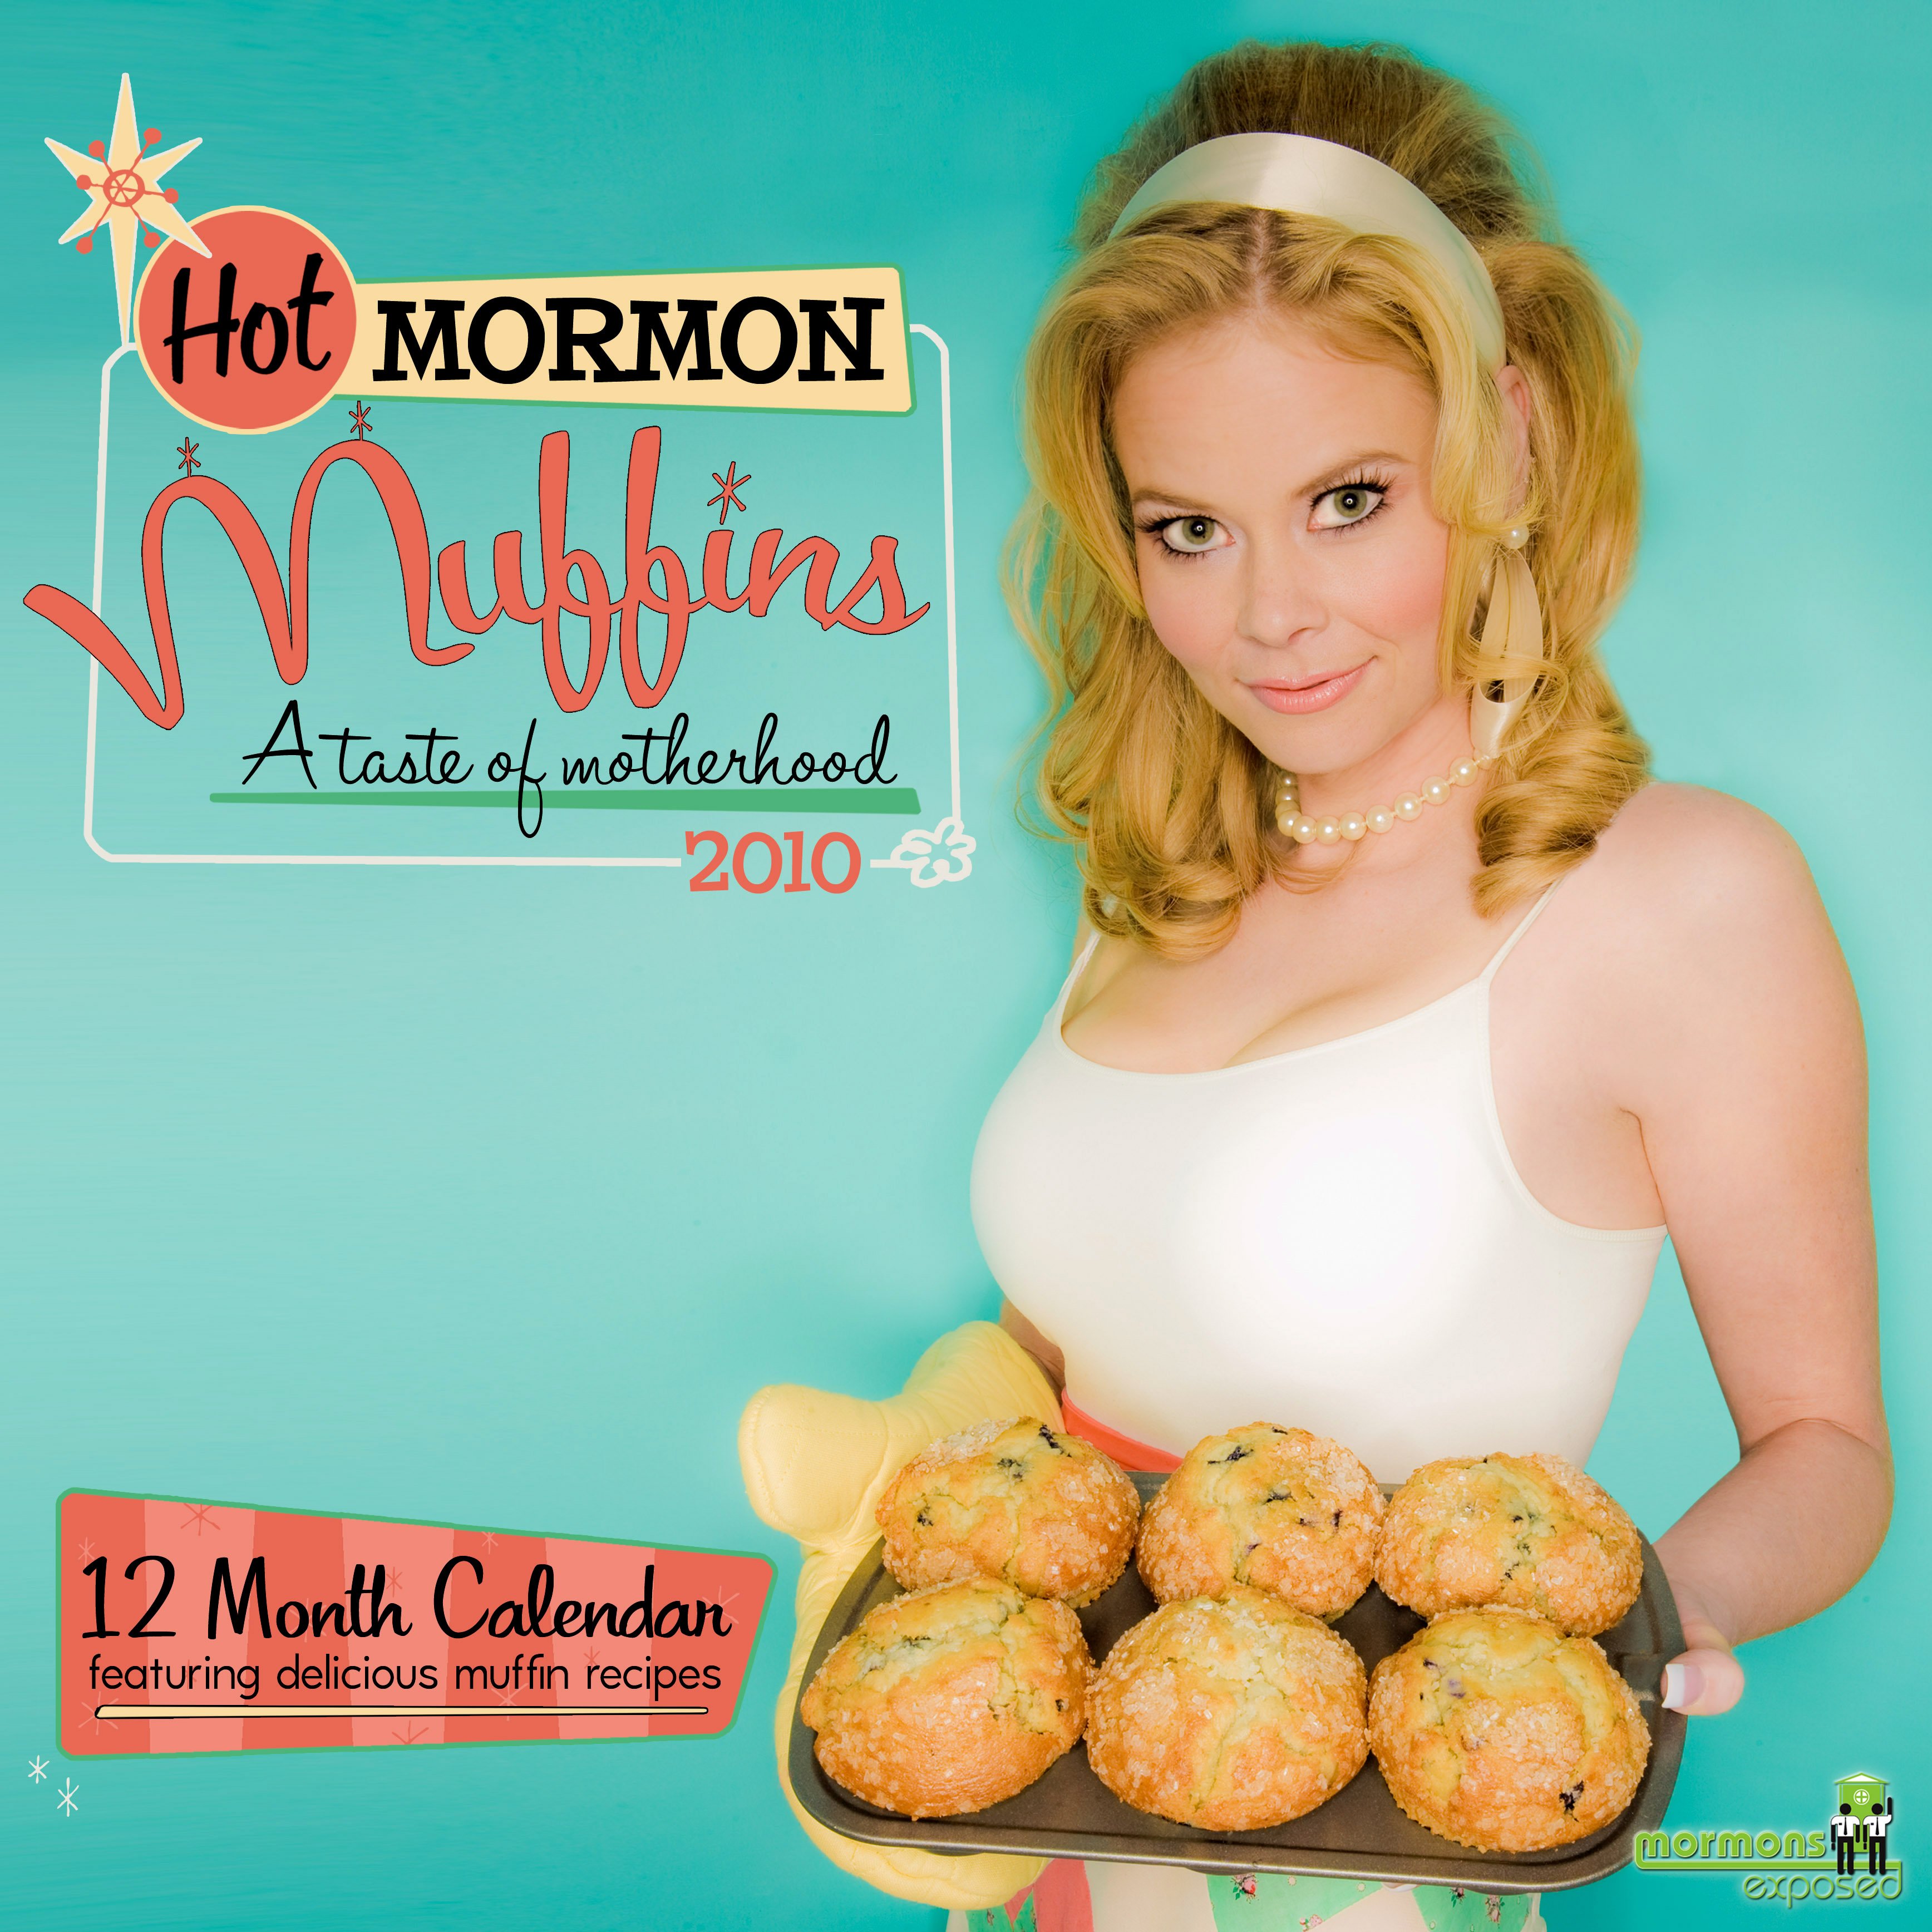 PS: Calendar Spoofs LDS Mom Stereotype.